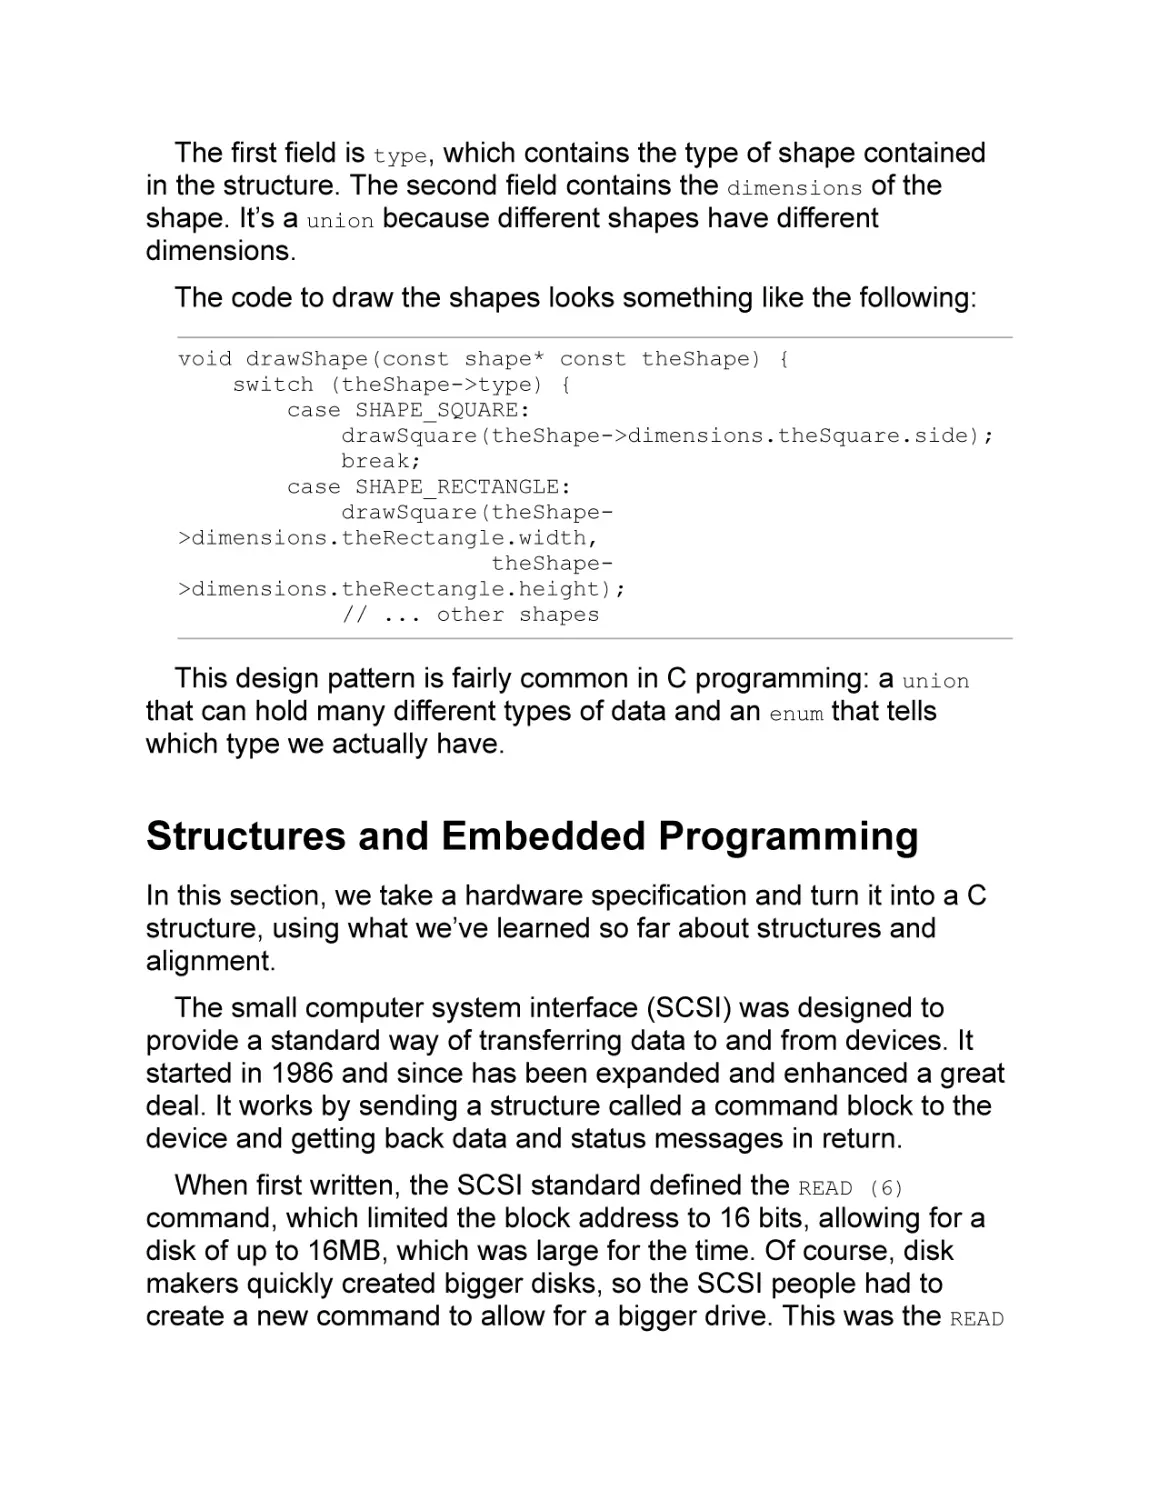 Structures and Embedded Programming